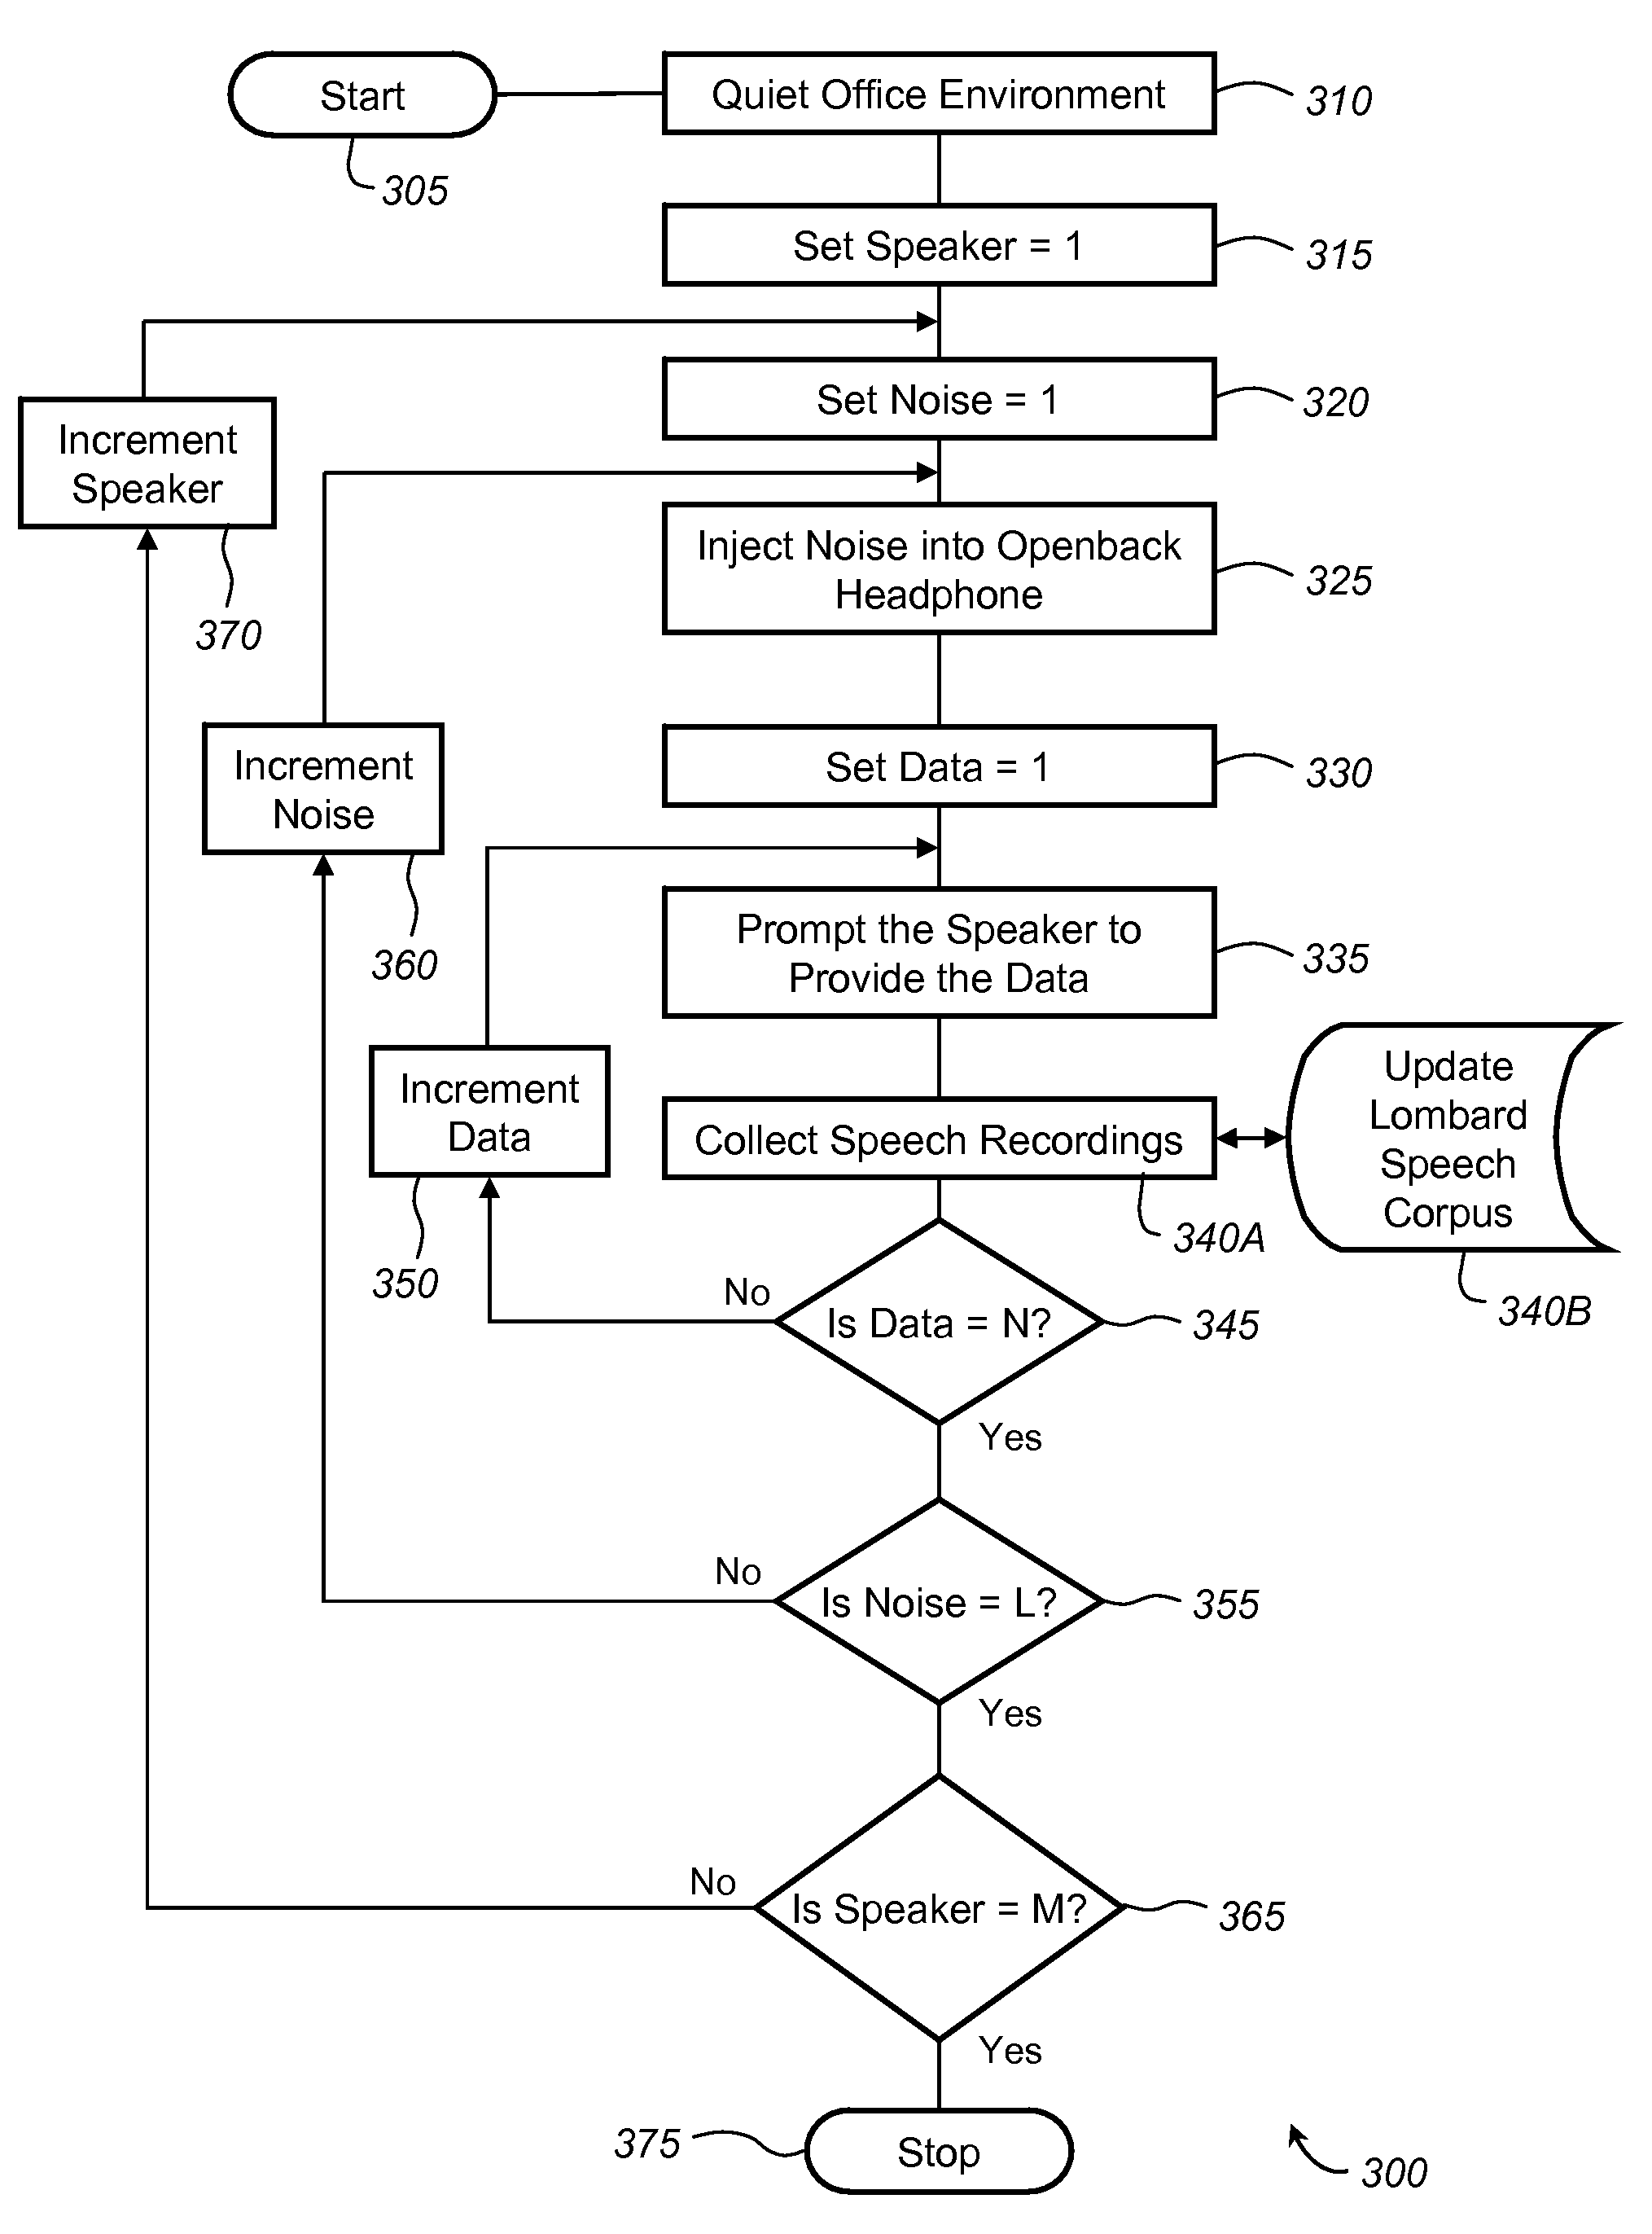 Automated speech recognition using normalized in-vehicle speech